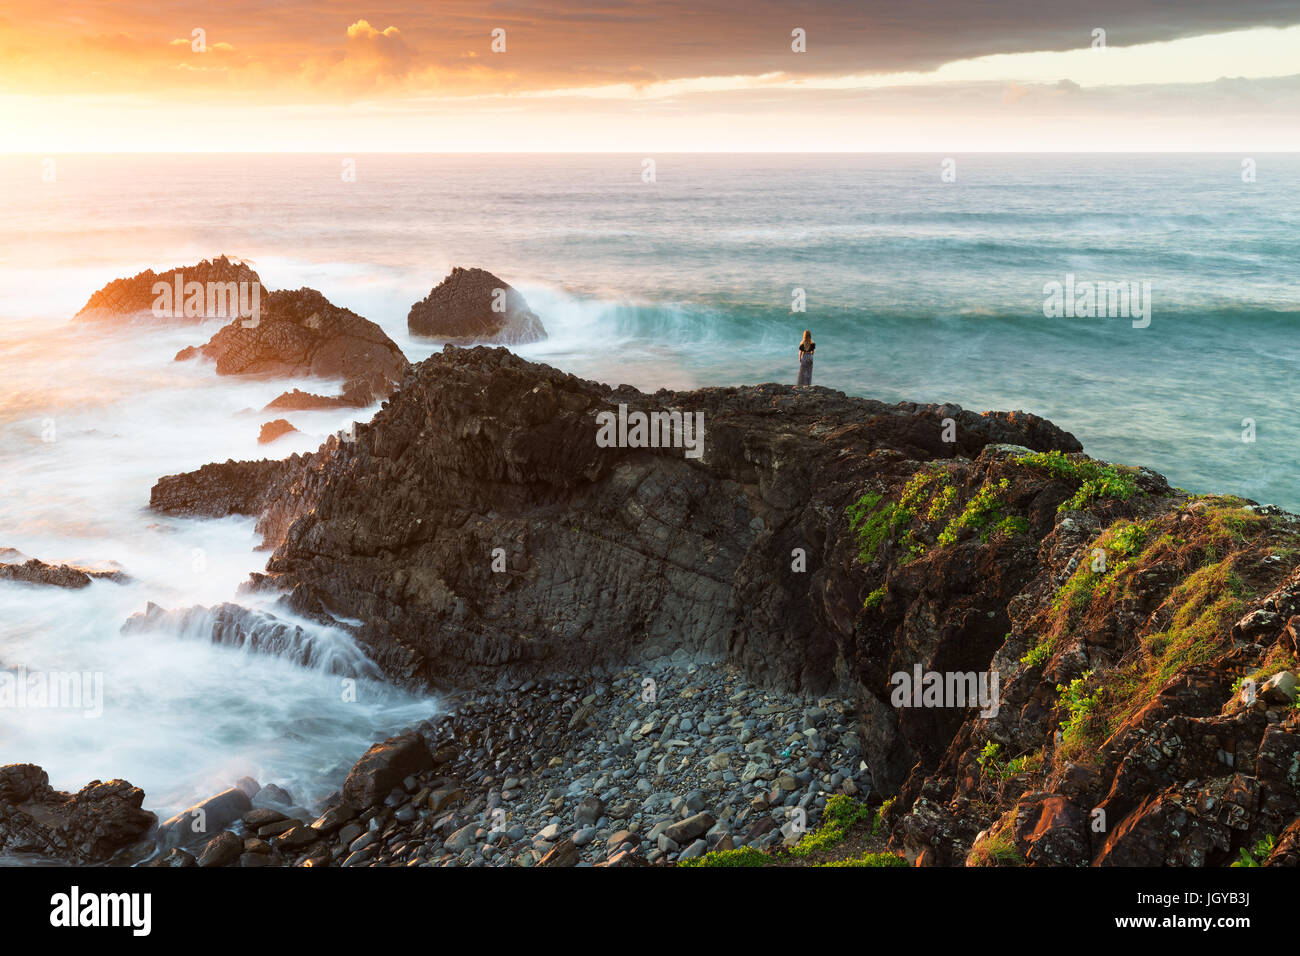 A woman is dwarfed in a majestic coastal scene as the sun rises and highlights the vibrant colours of the landscape and crashing waves. Stock Photo